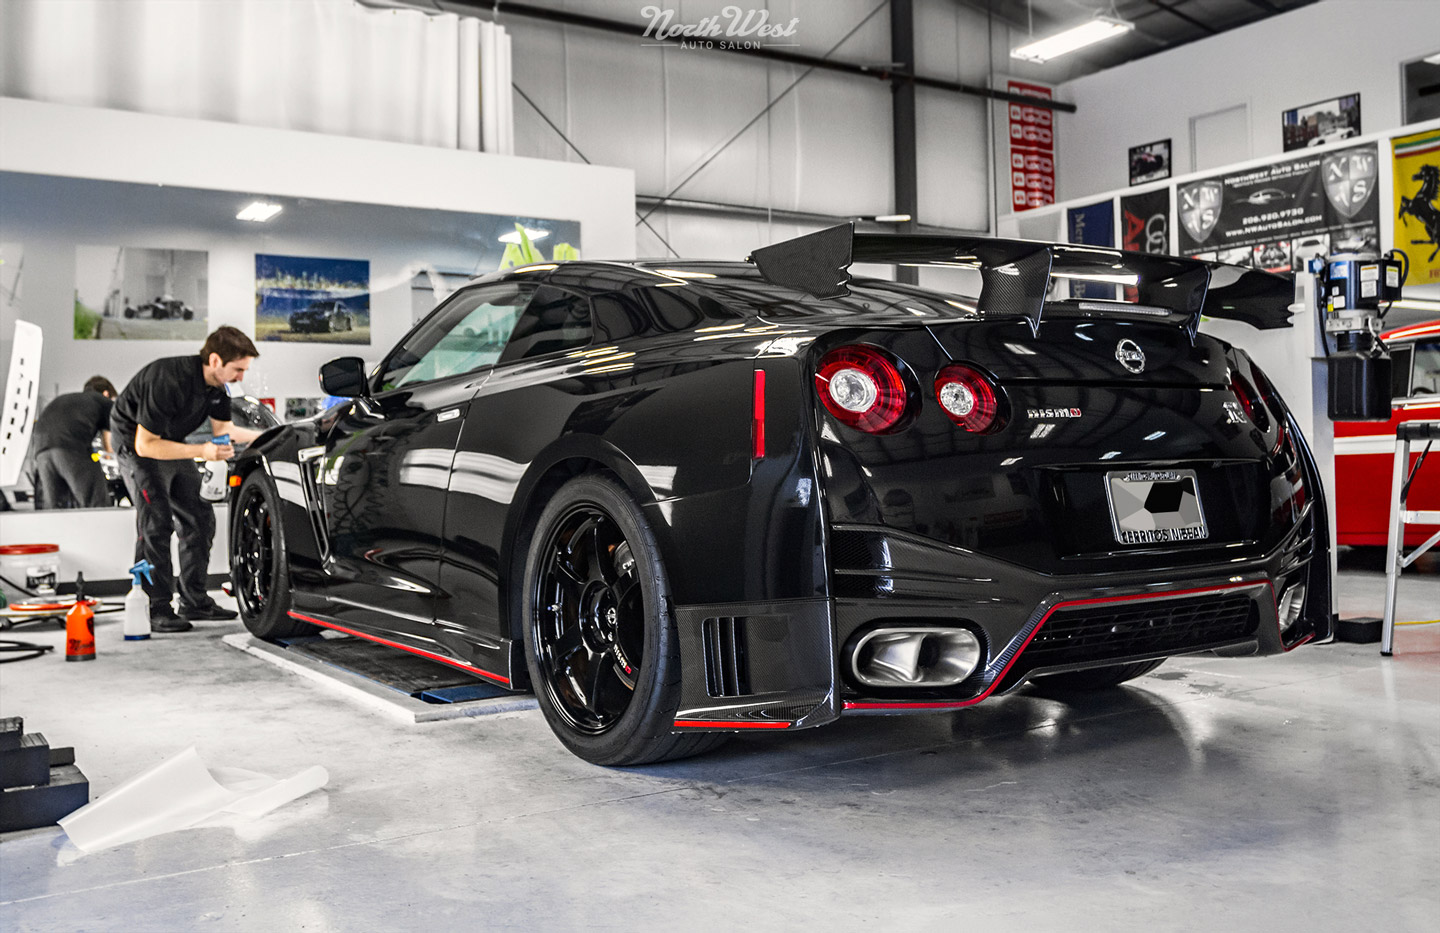 Nissan-GT-R-NISMO-XPEL-PPF-install-bay-s